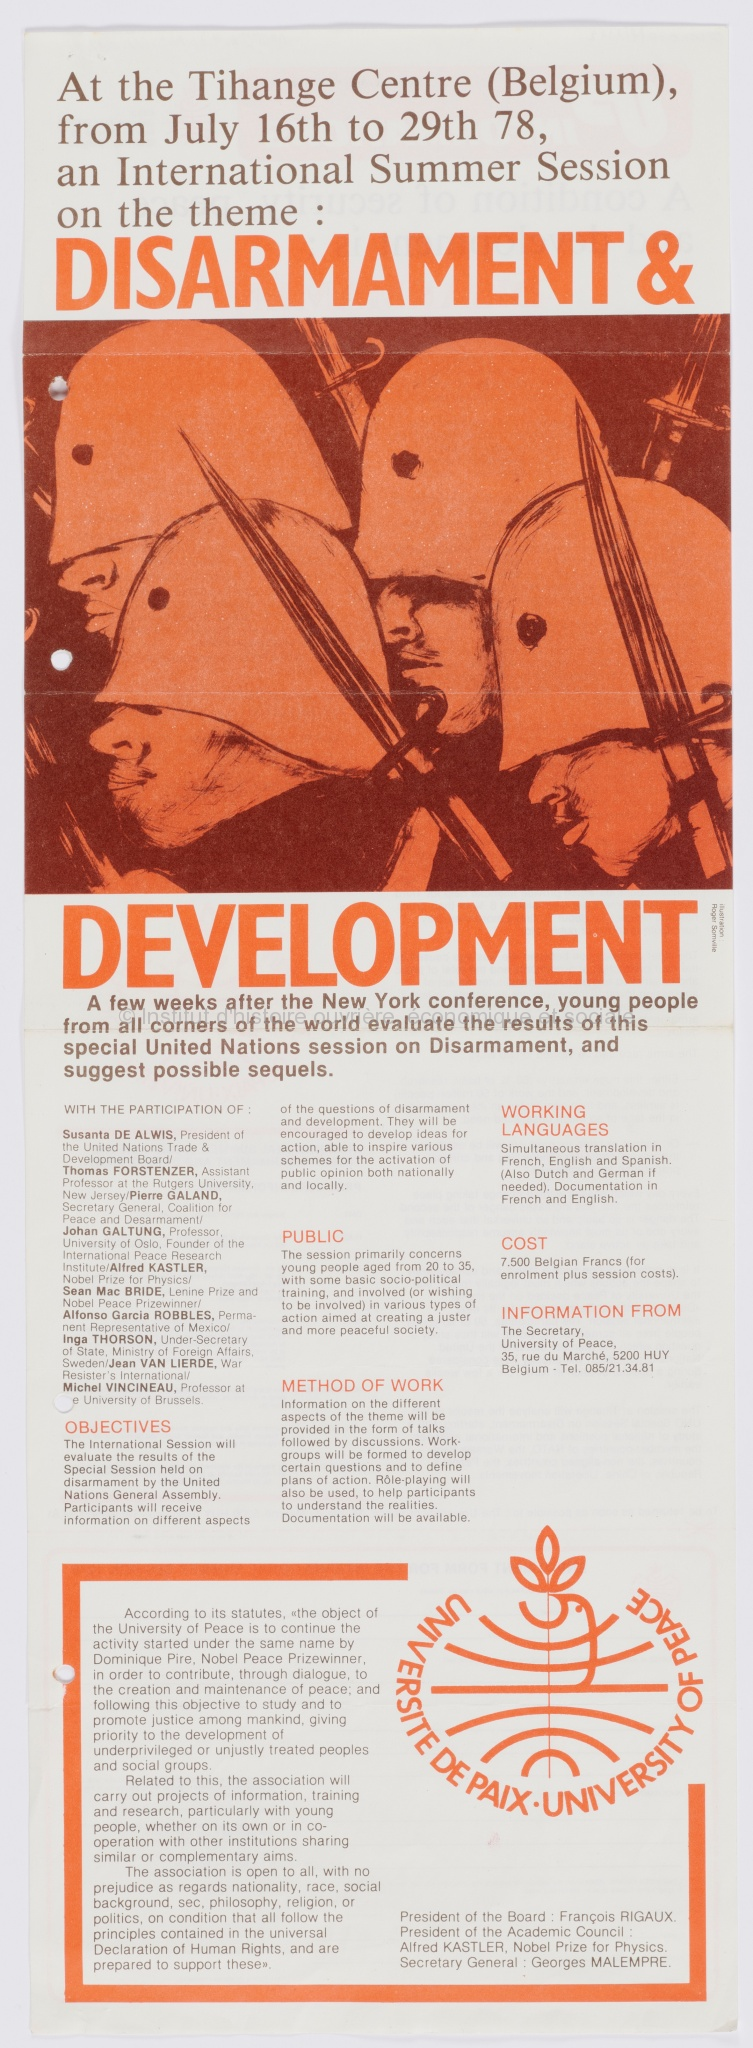 At the Tihange Centre (Belgium), from July 26th to 29th 78, an international summer session on the theme "Disarmament & development"